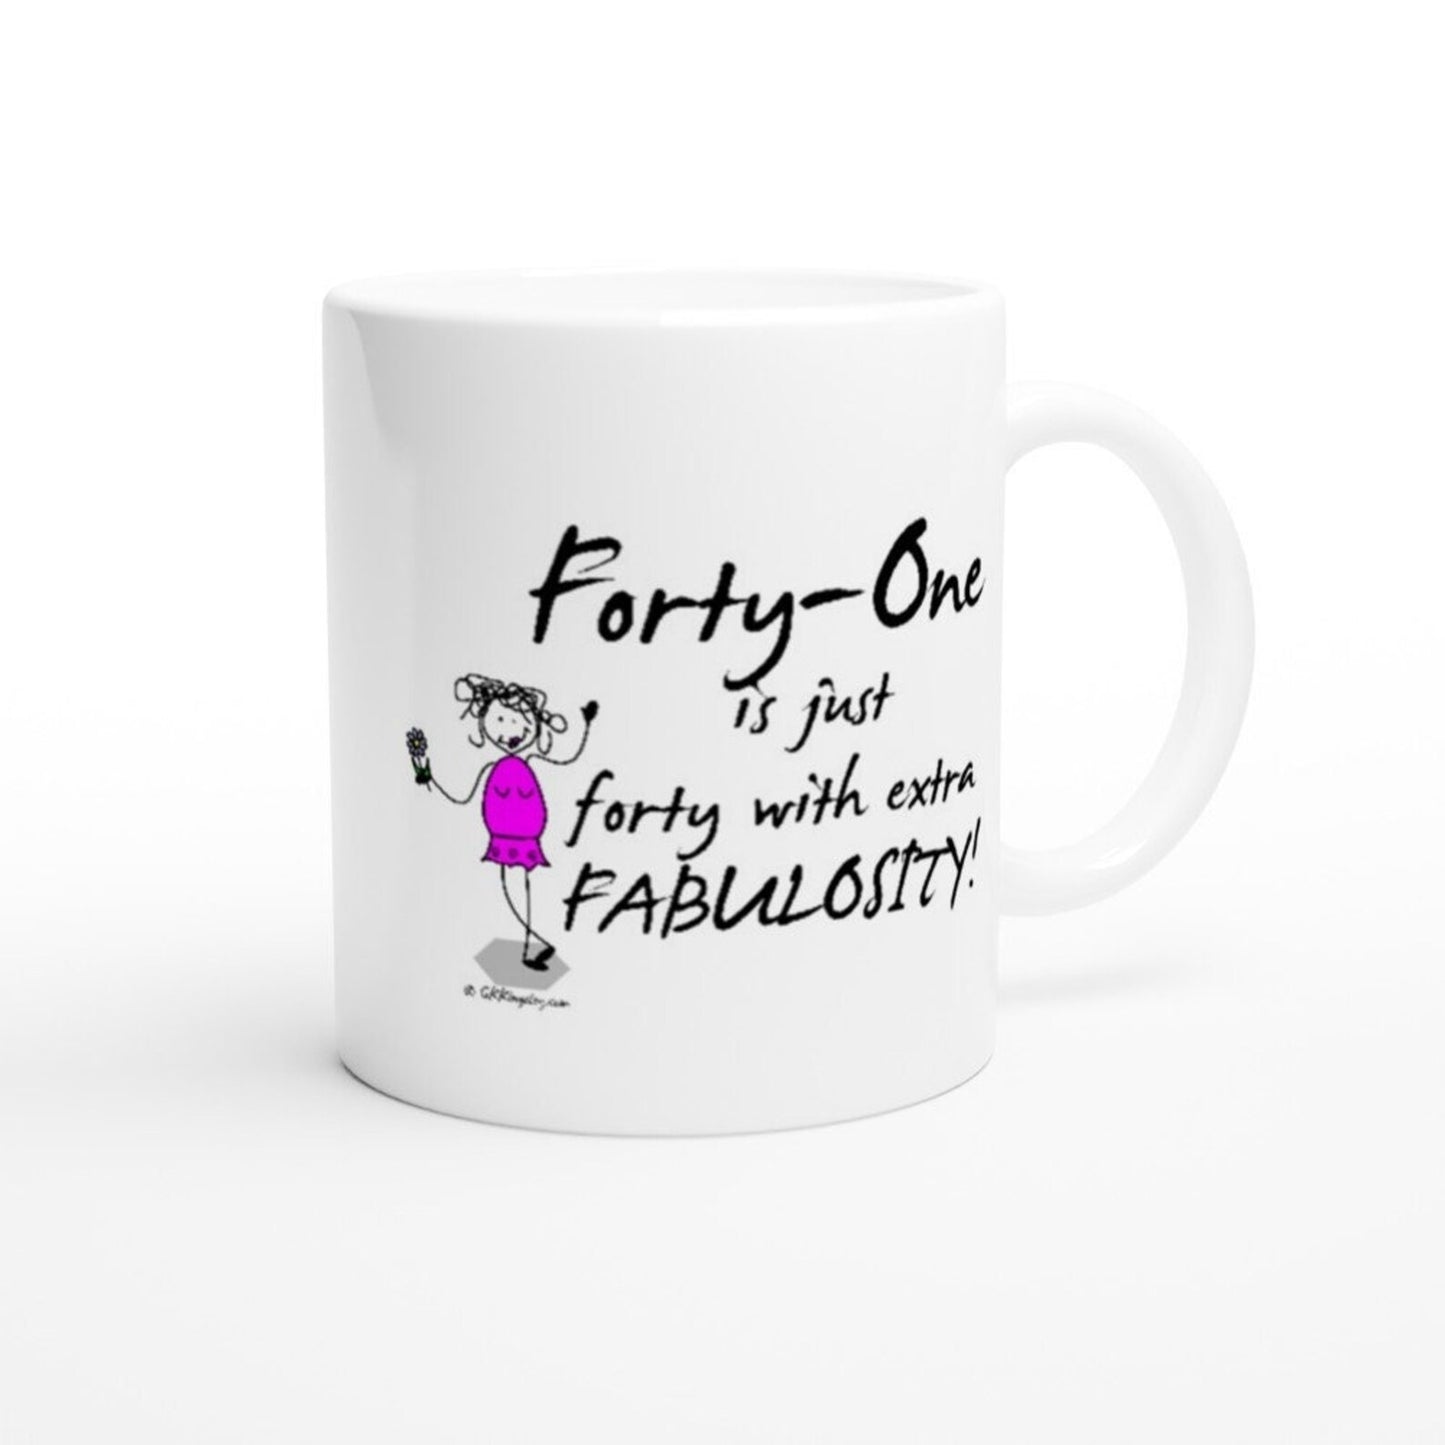 Perfect 41st Birthday Mug - Forty-One is just forty with extra FABULOSITY!